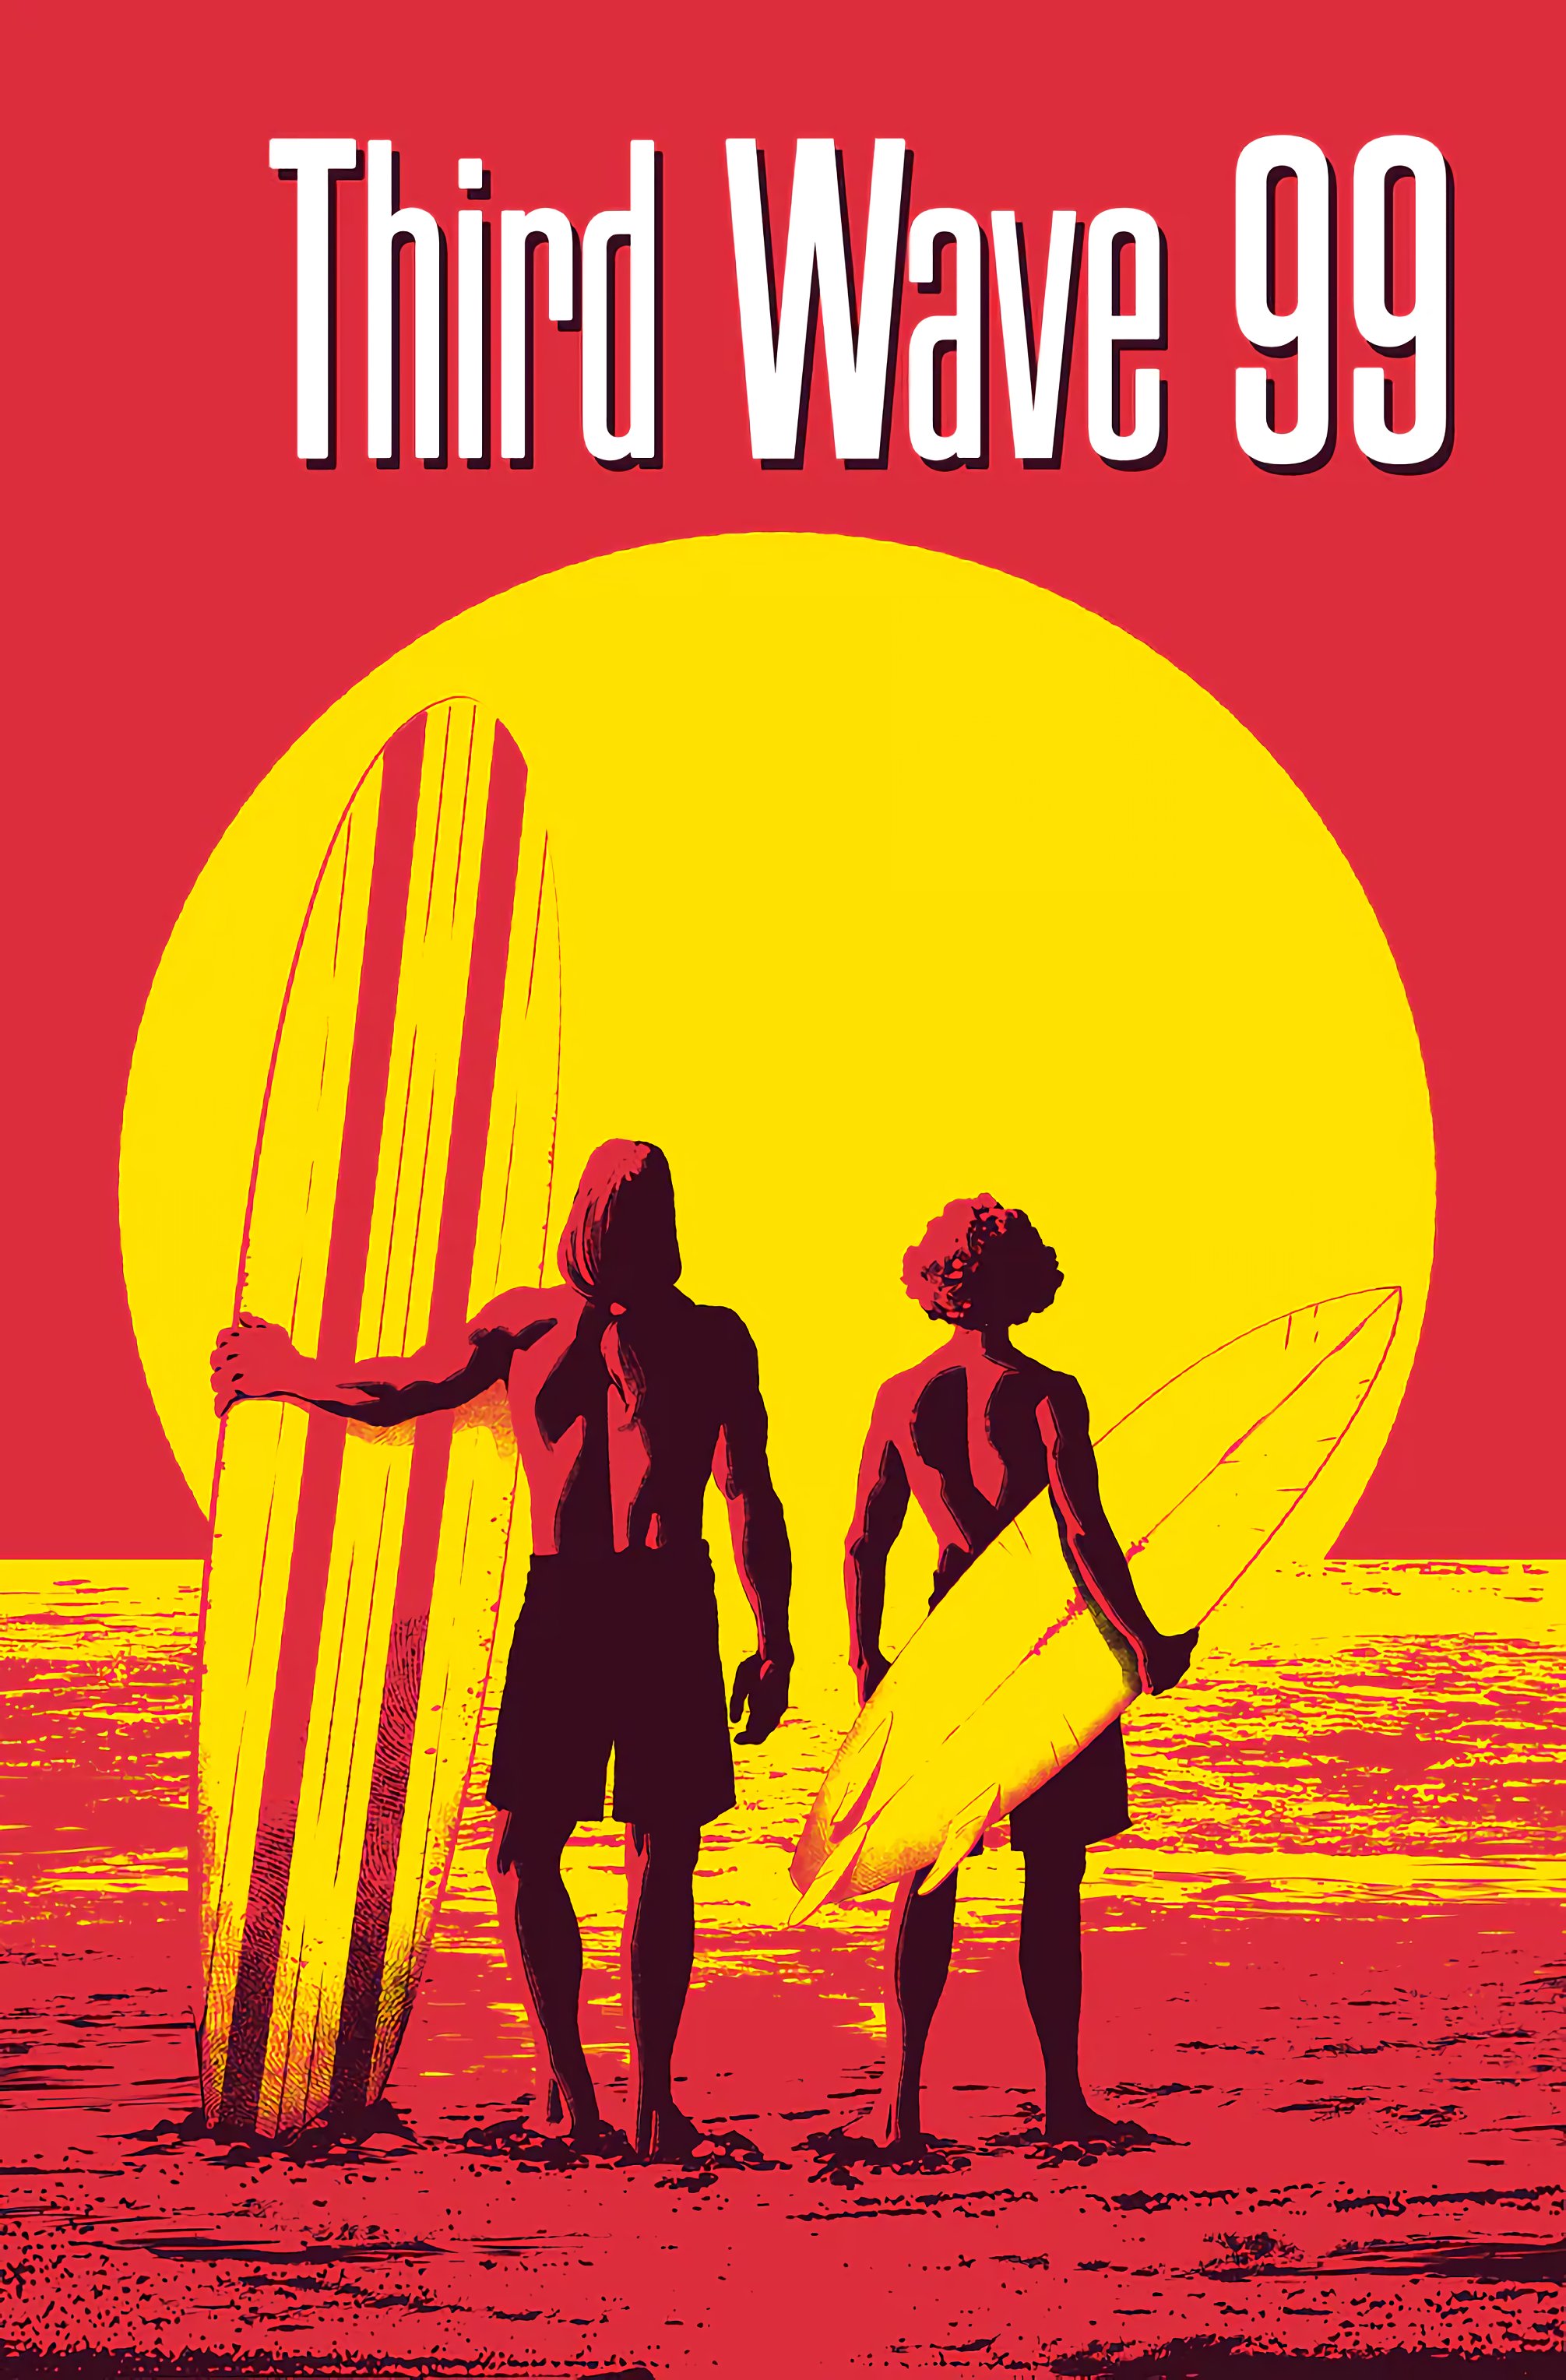 Read online Third Wave 99 comic -  Issue # TPB - 1